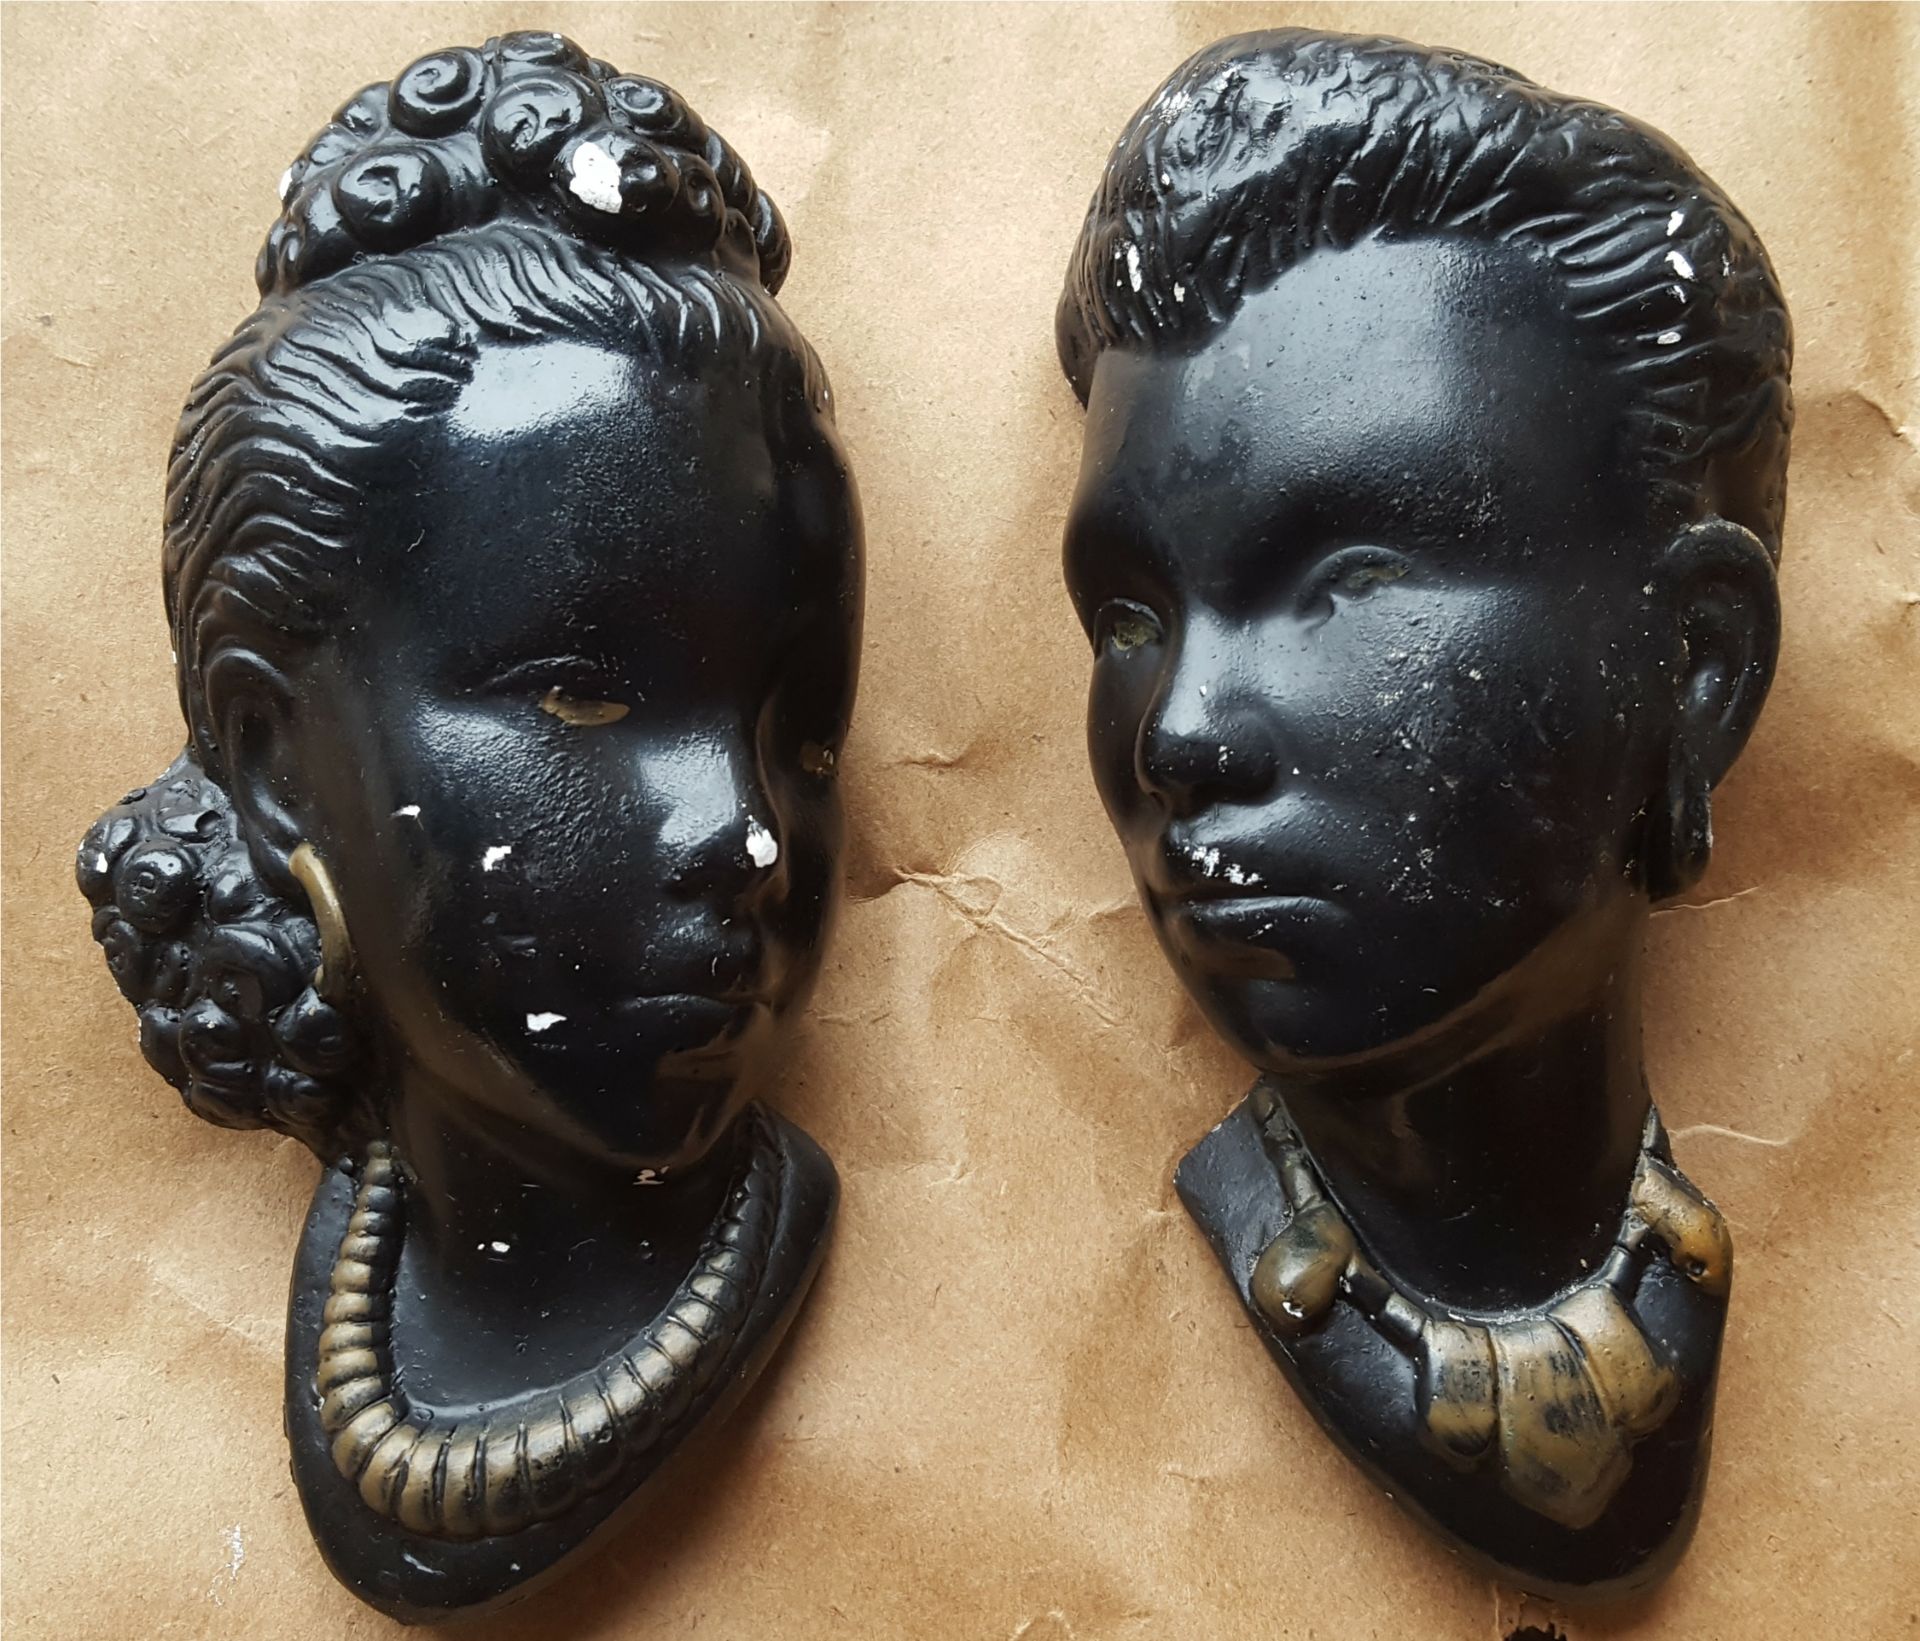 Vintage Retro Kitsch Wall Plaques Asian Busts - No Reserve